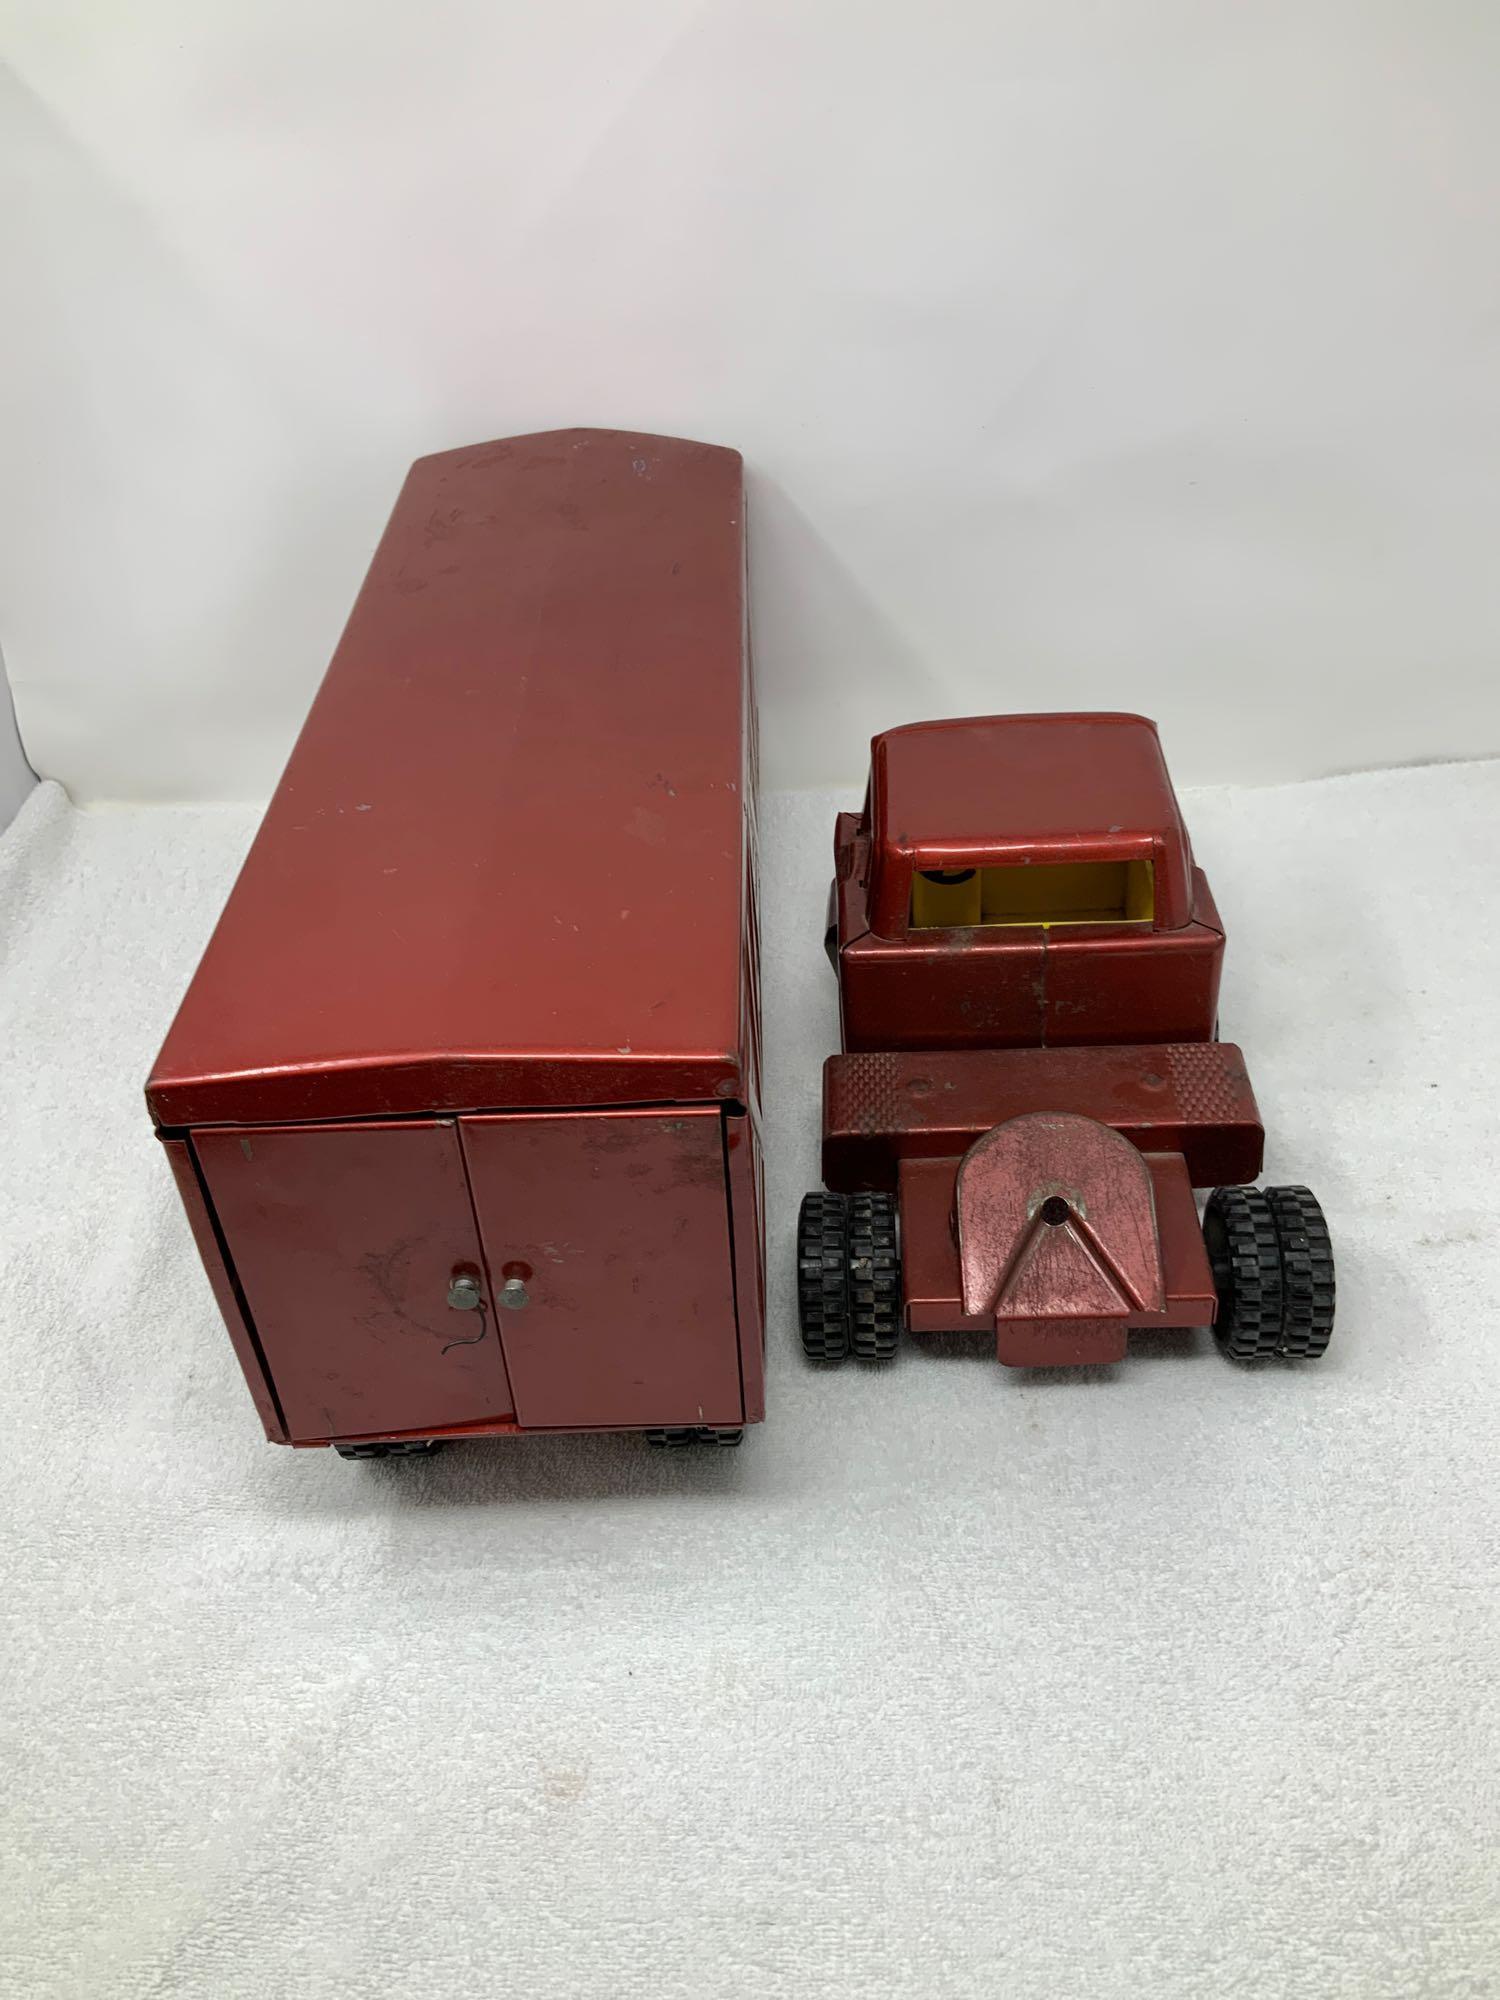 Vintage Structo pressed steel livestock truck and trailer toy